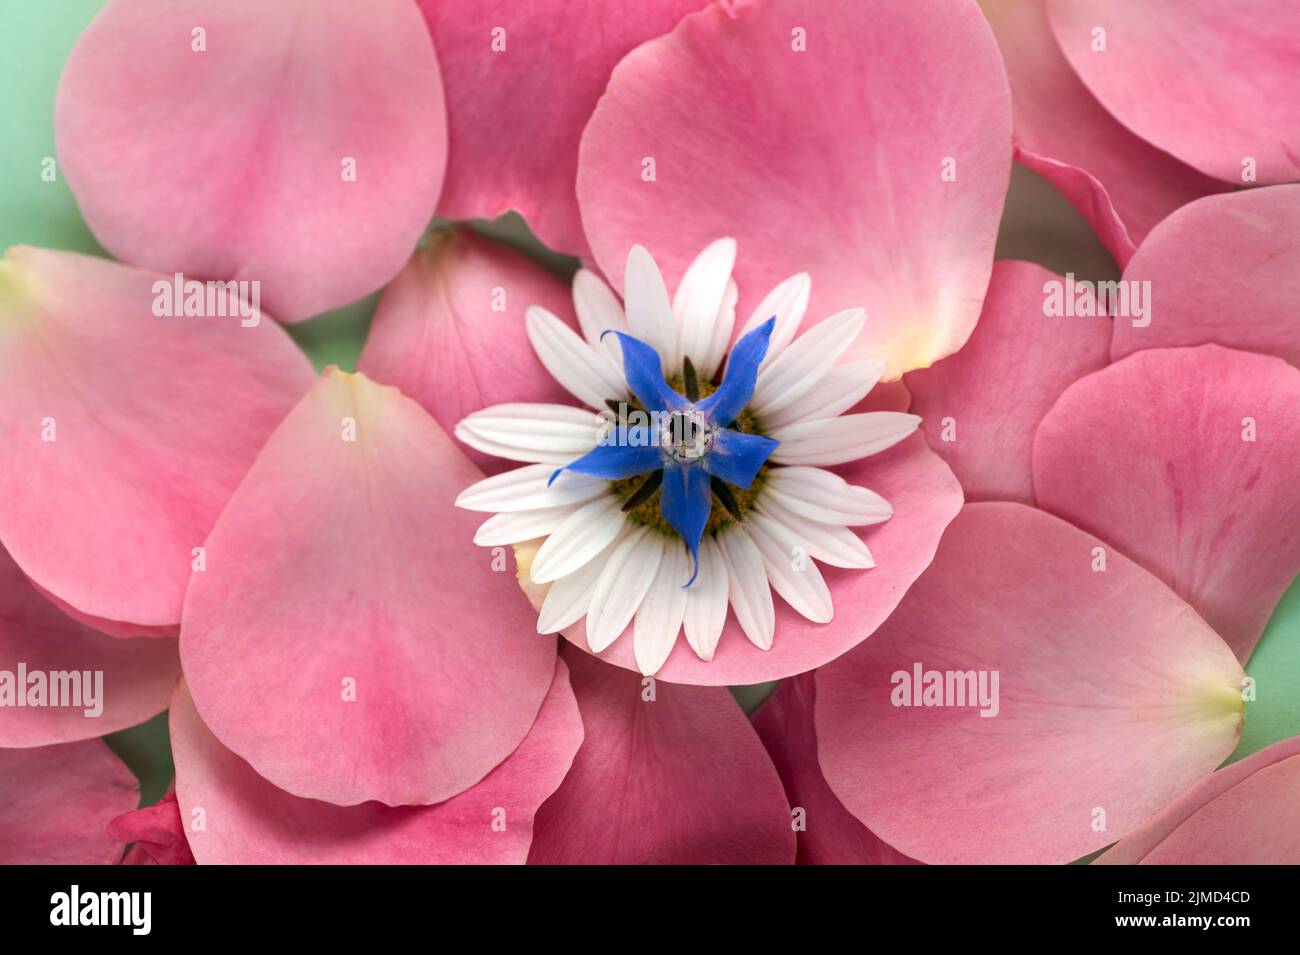 Background texture of beautiful delicate pink rose petals and daisy, marguerite flower. Stock Photo